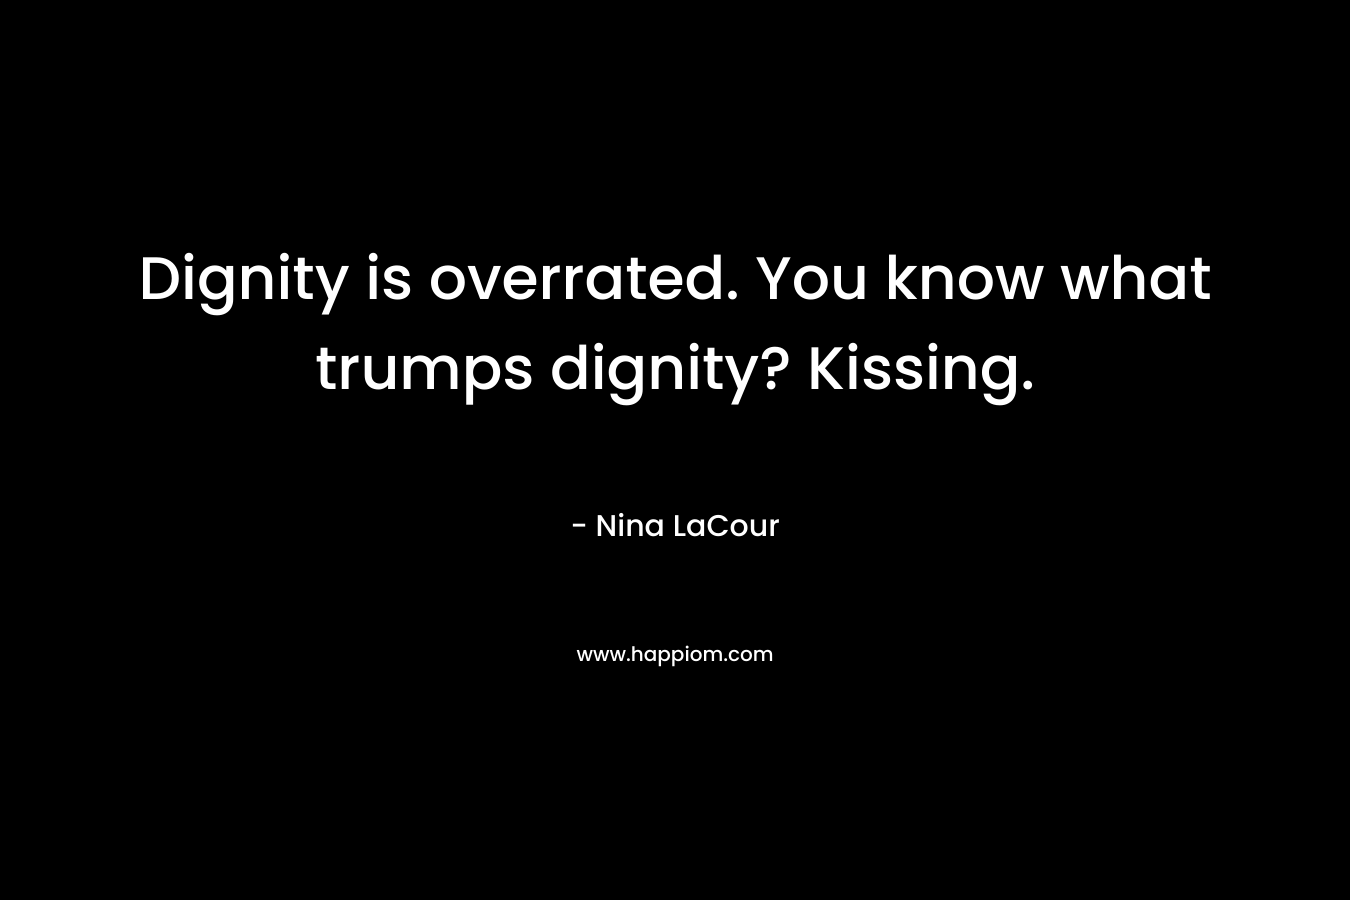 Dignity is overrated. You know what trumps dignity? Kissing. – Nina LaCour